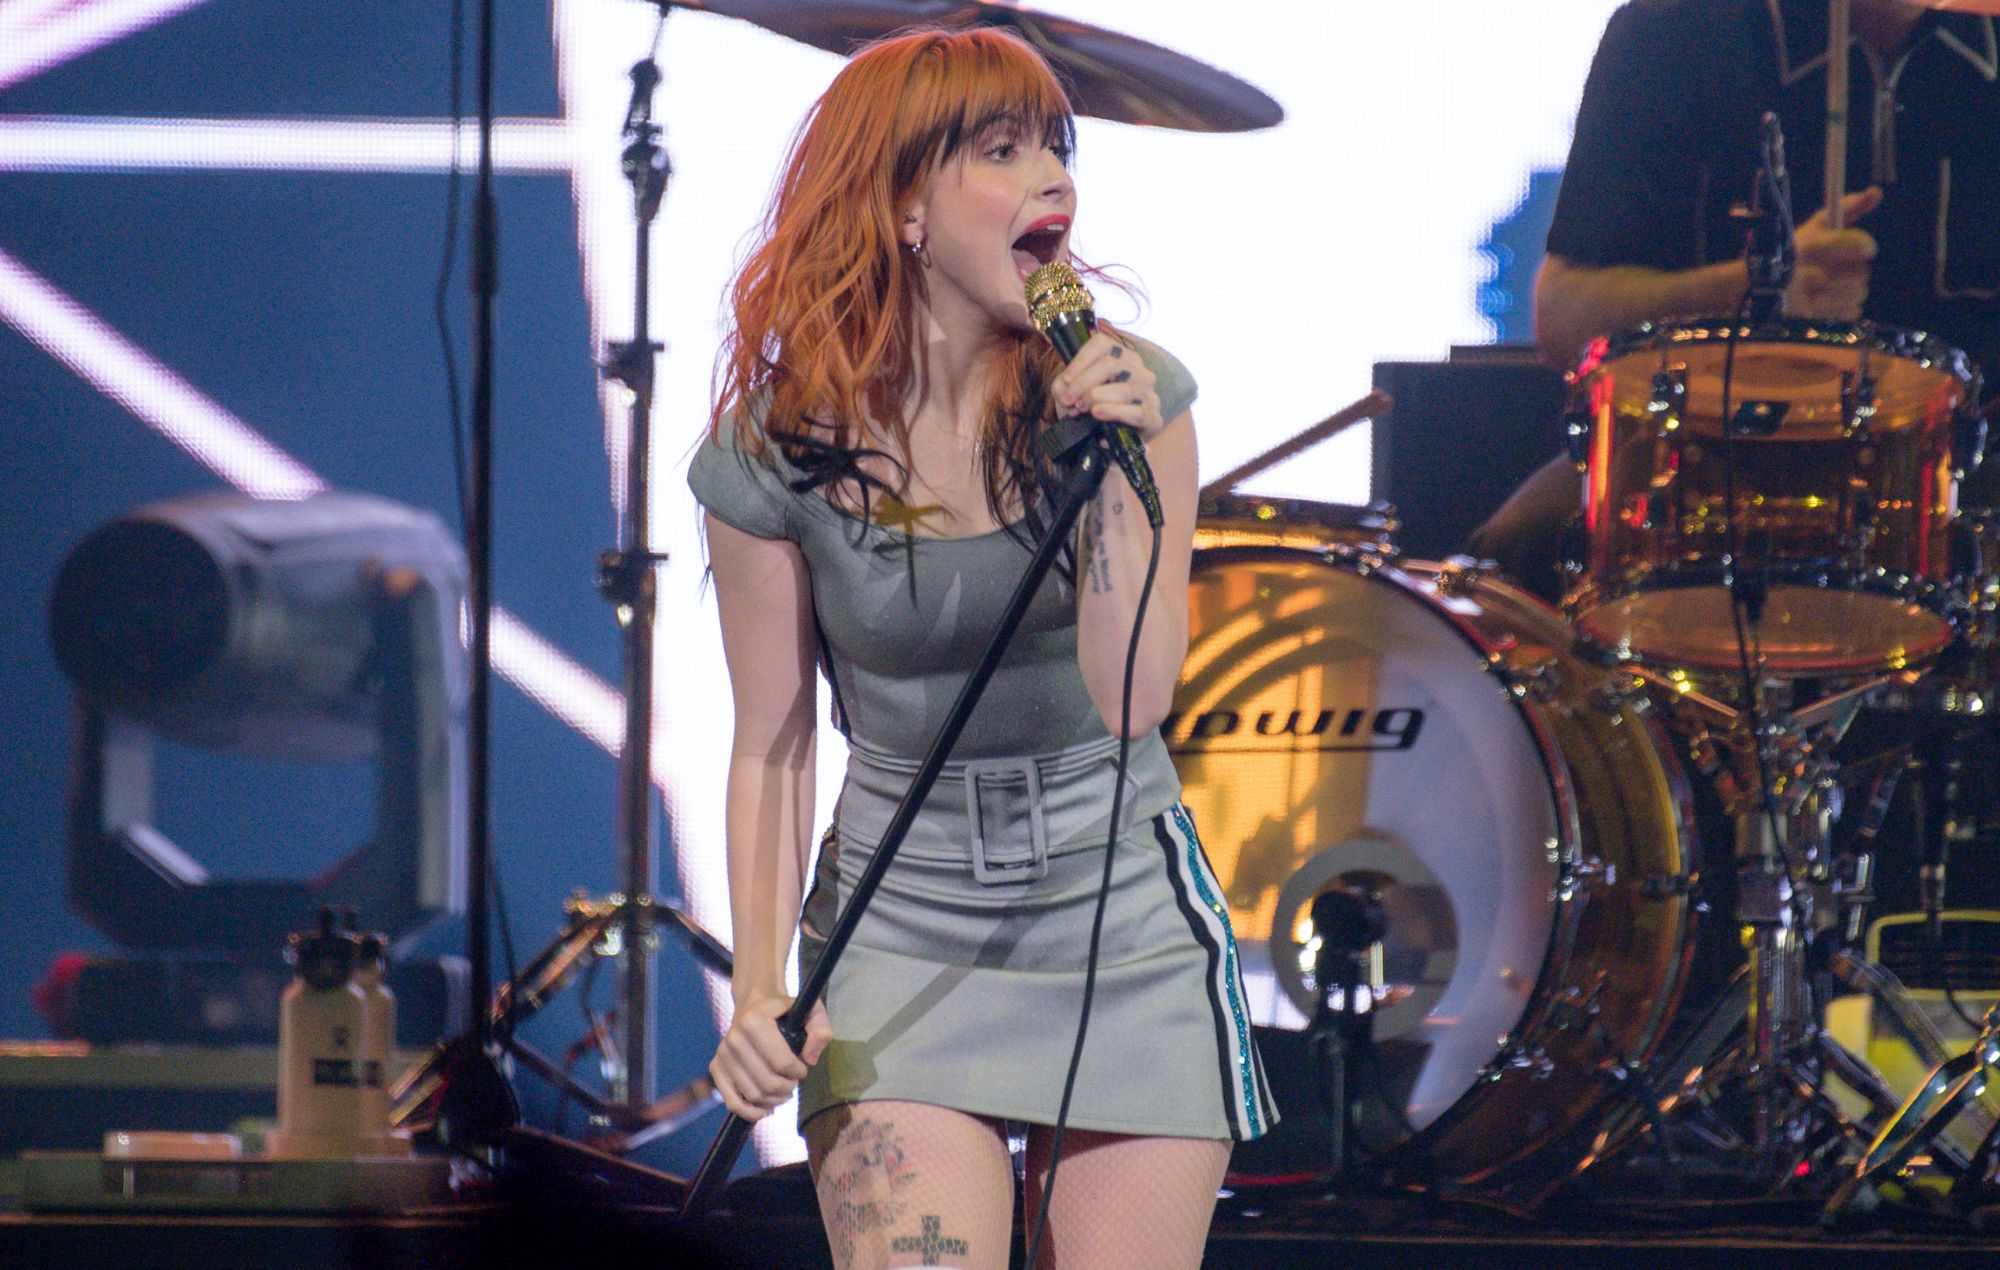 Paramore announce 10th anniversary reissue of self-titled album with new artwork